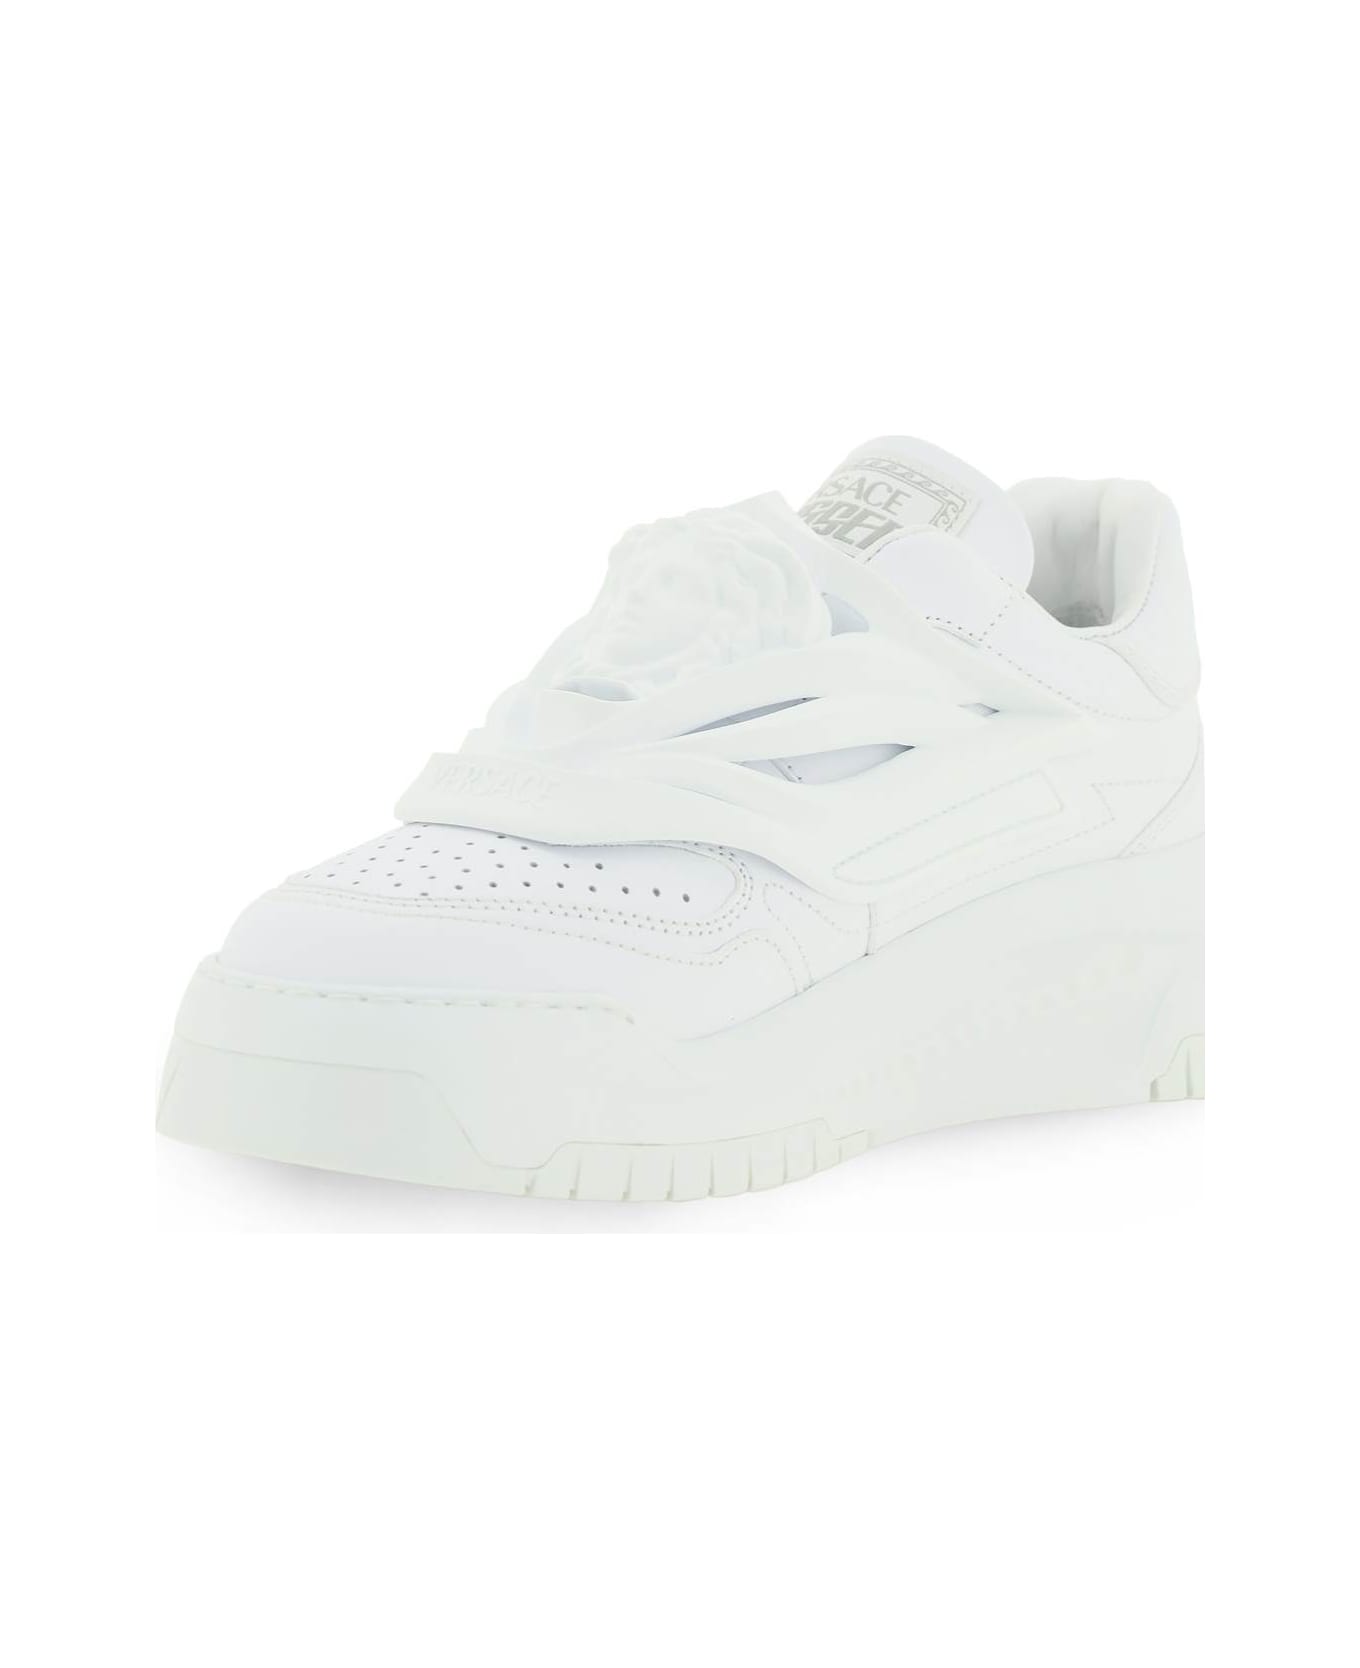 Versace Odissea Sneakers - White スニーカー